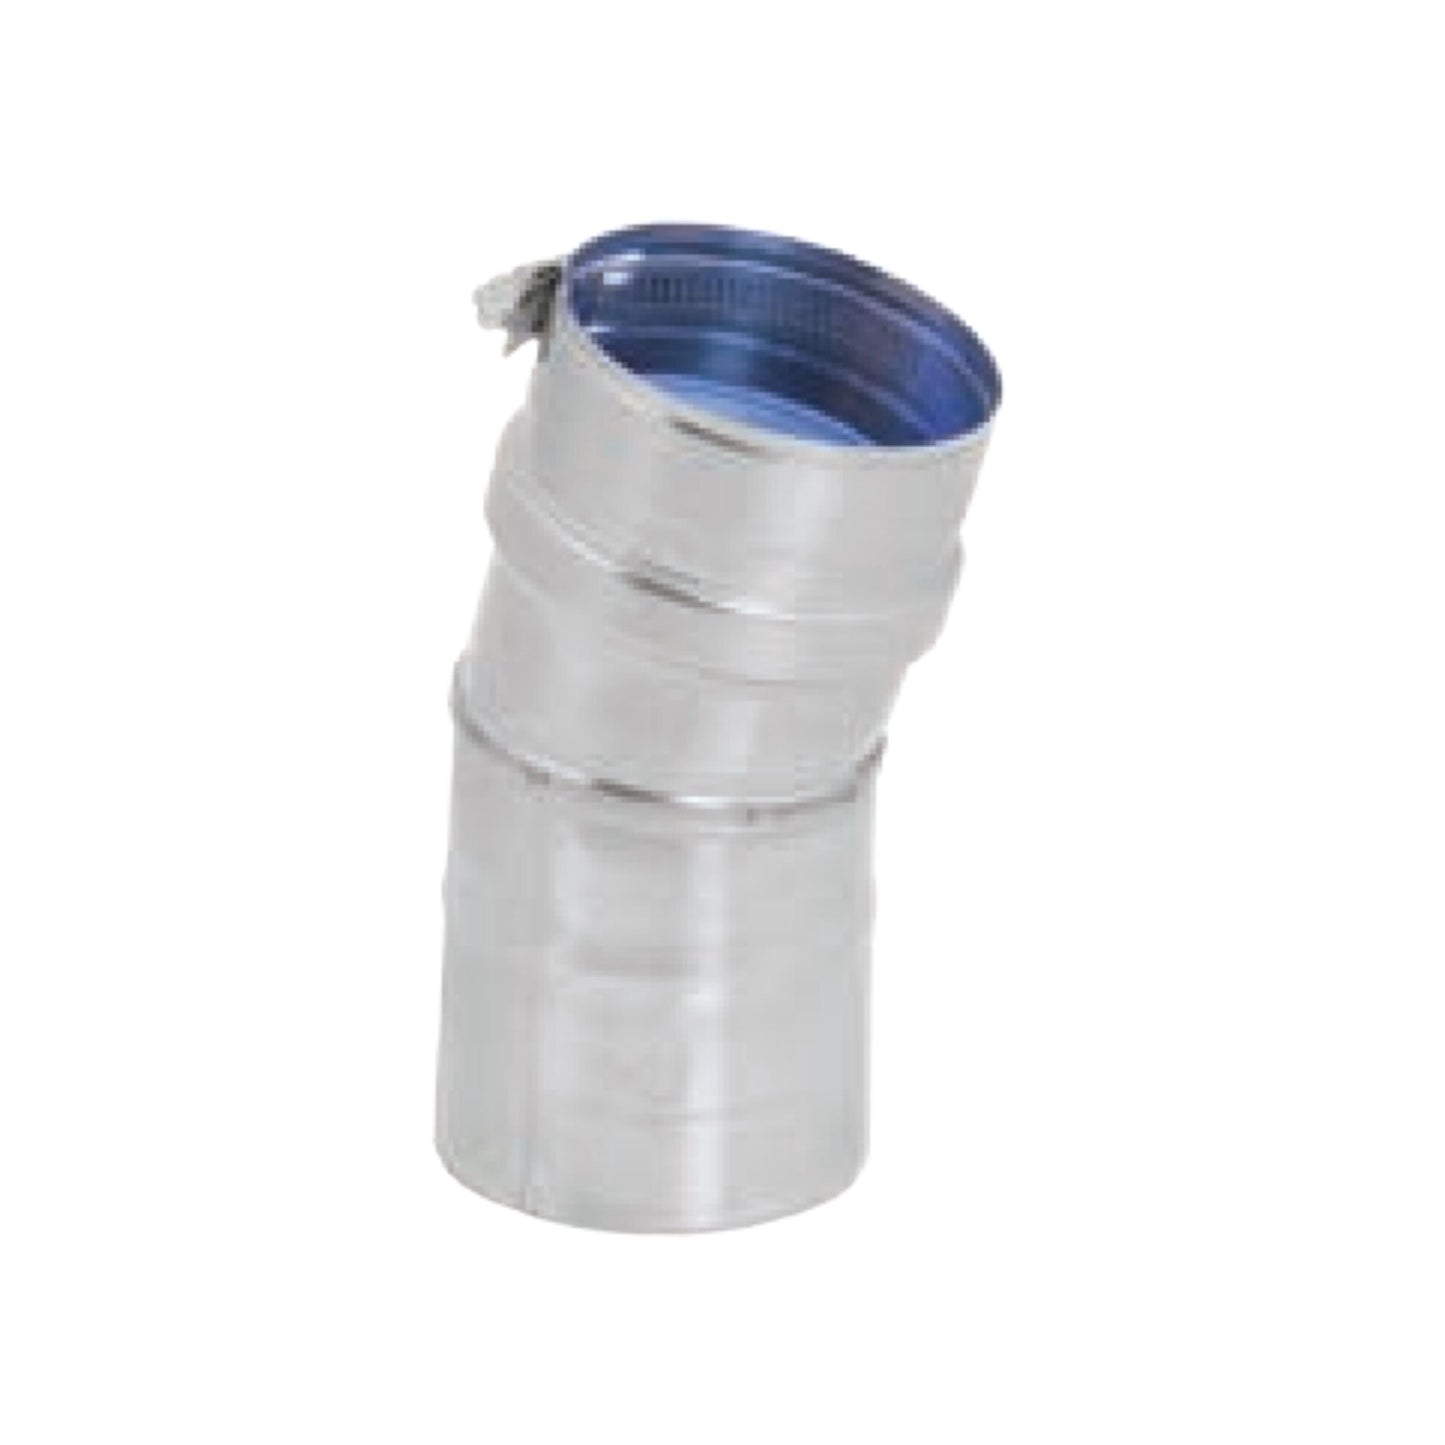 DuraVent FasNSeal 4" 15 Degree 29-4C Stainless Steel Elbow